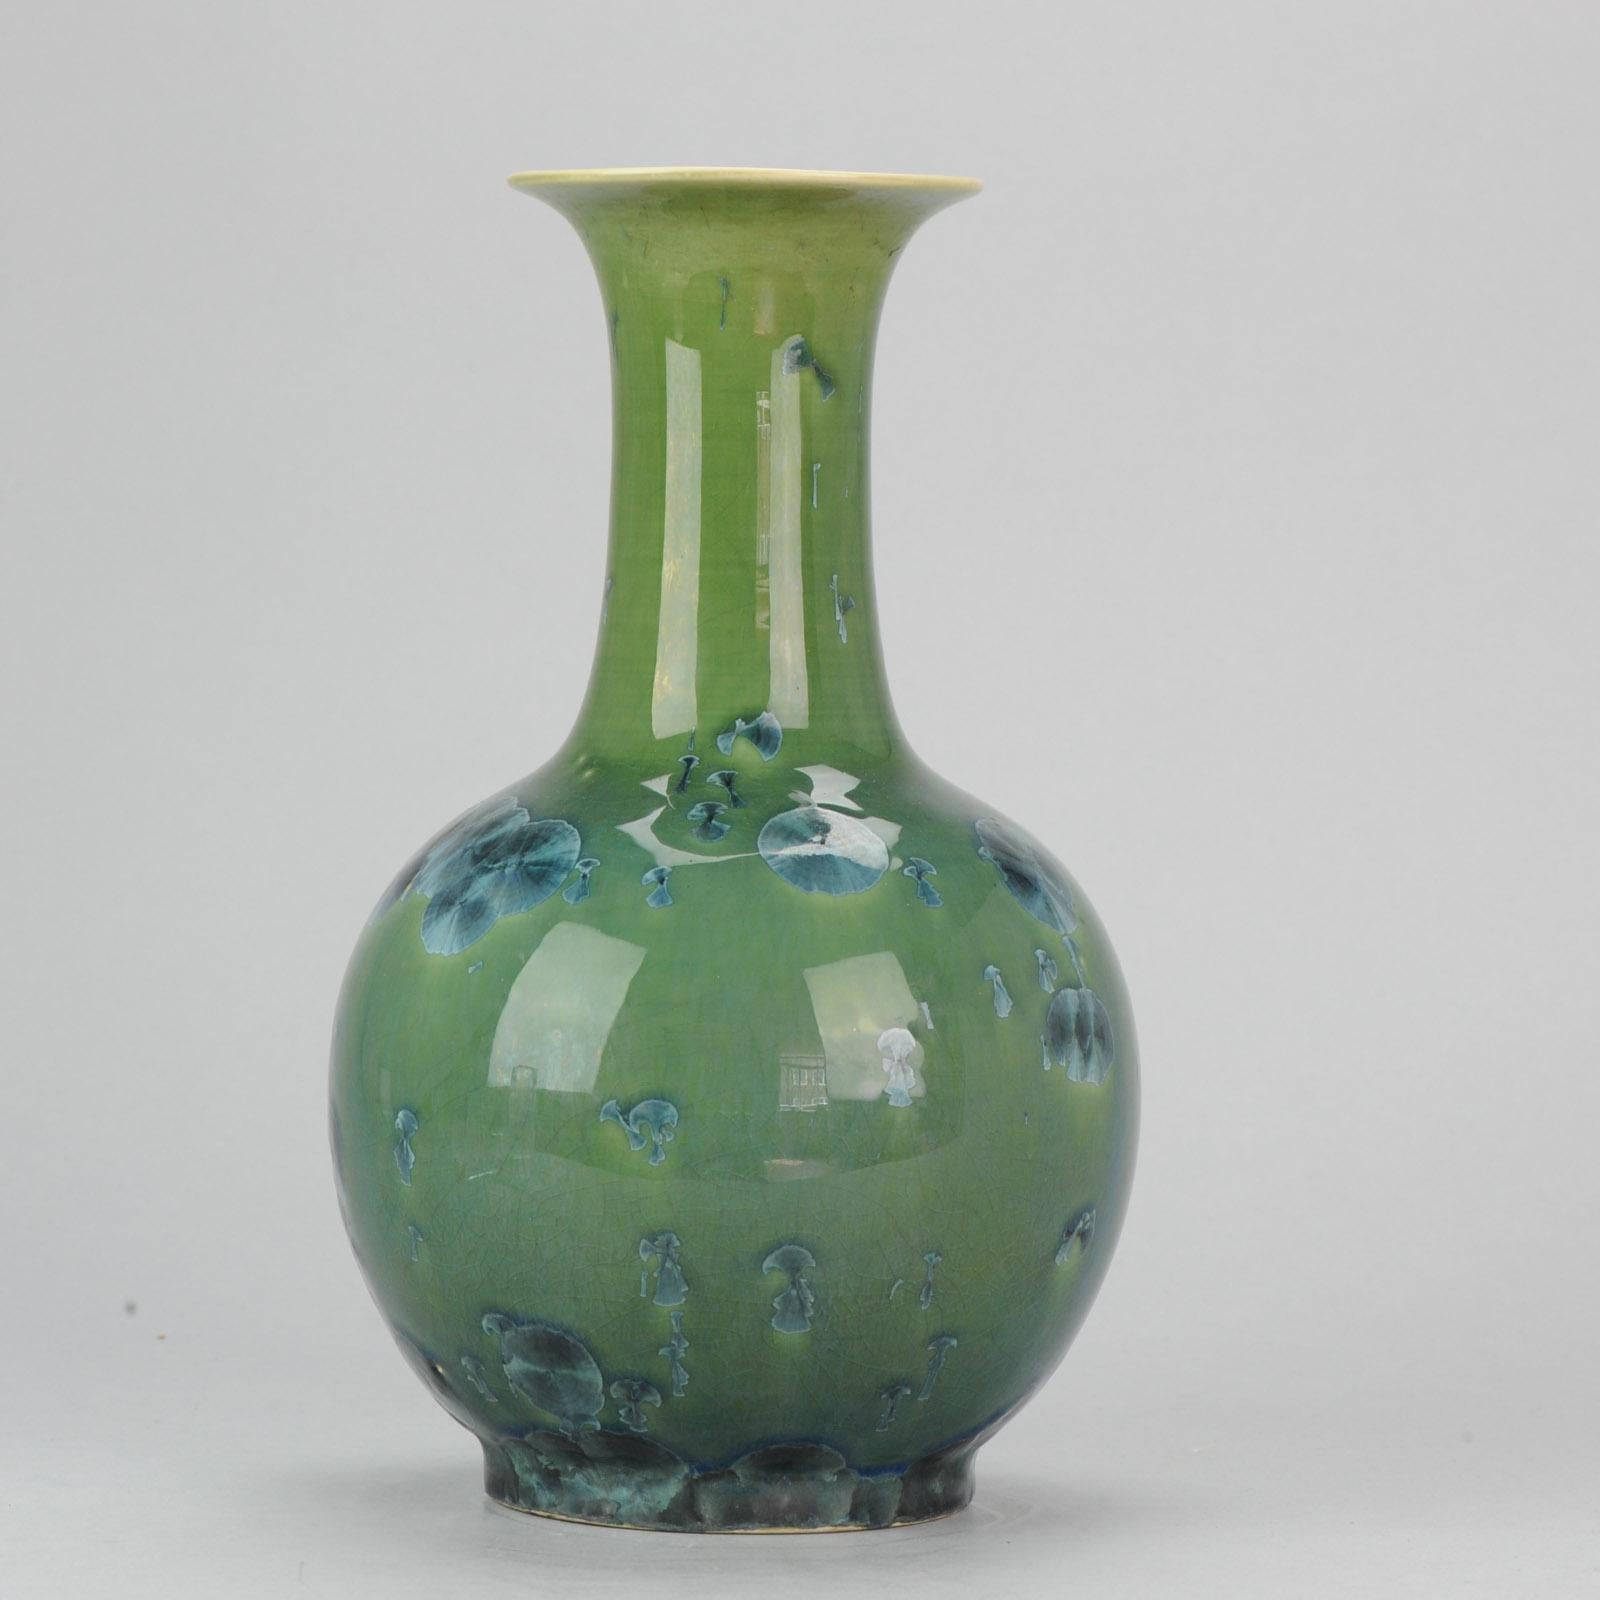 Very nice vase, high quality. Innovative Crystalline glaze used in Shiwan in the 1970s-1980s. A true masterpiece. This is teh antique of the future.

Provenance: Bought in the 1982 in China. Afterwards exhibited and on loan to the Leiden Museum of